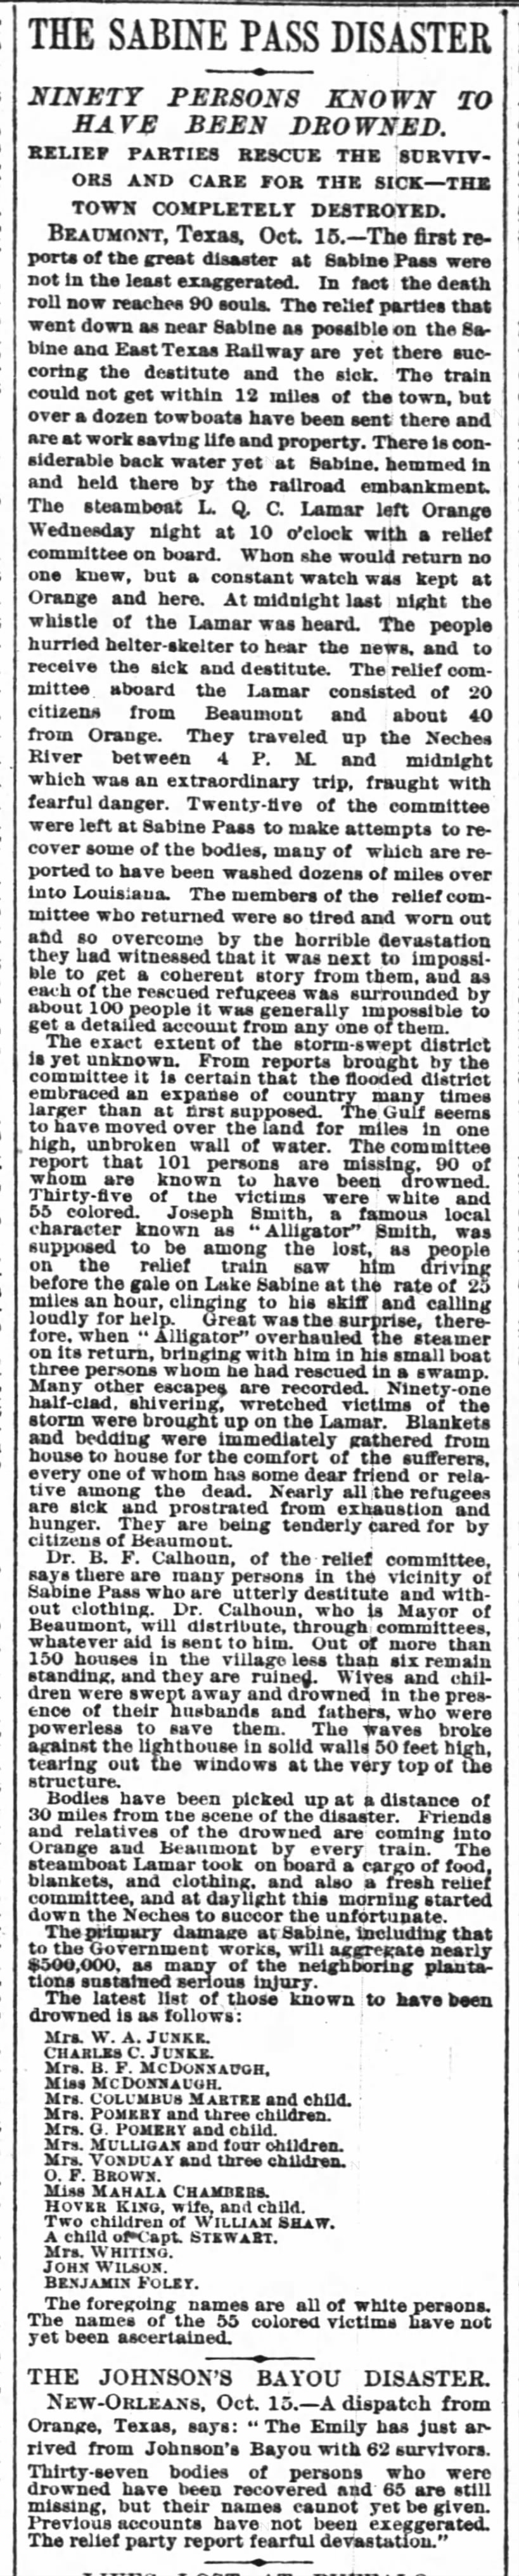 The Sabine Pass Disaster and The Johnson's Bayou Disaster
The New York Times
16 Oct 1886